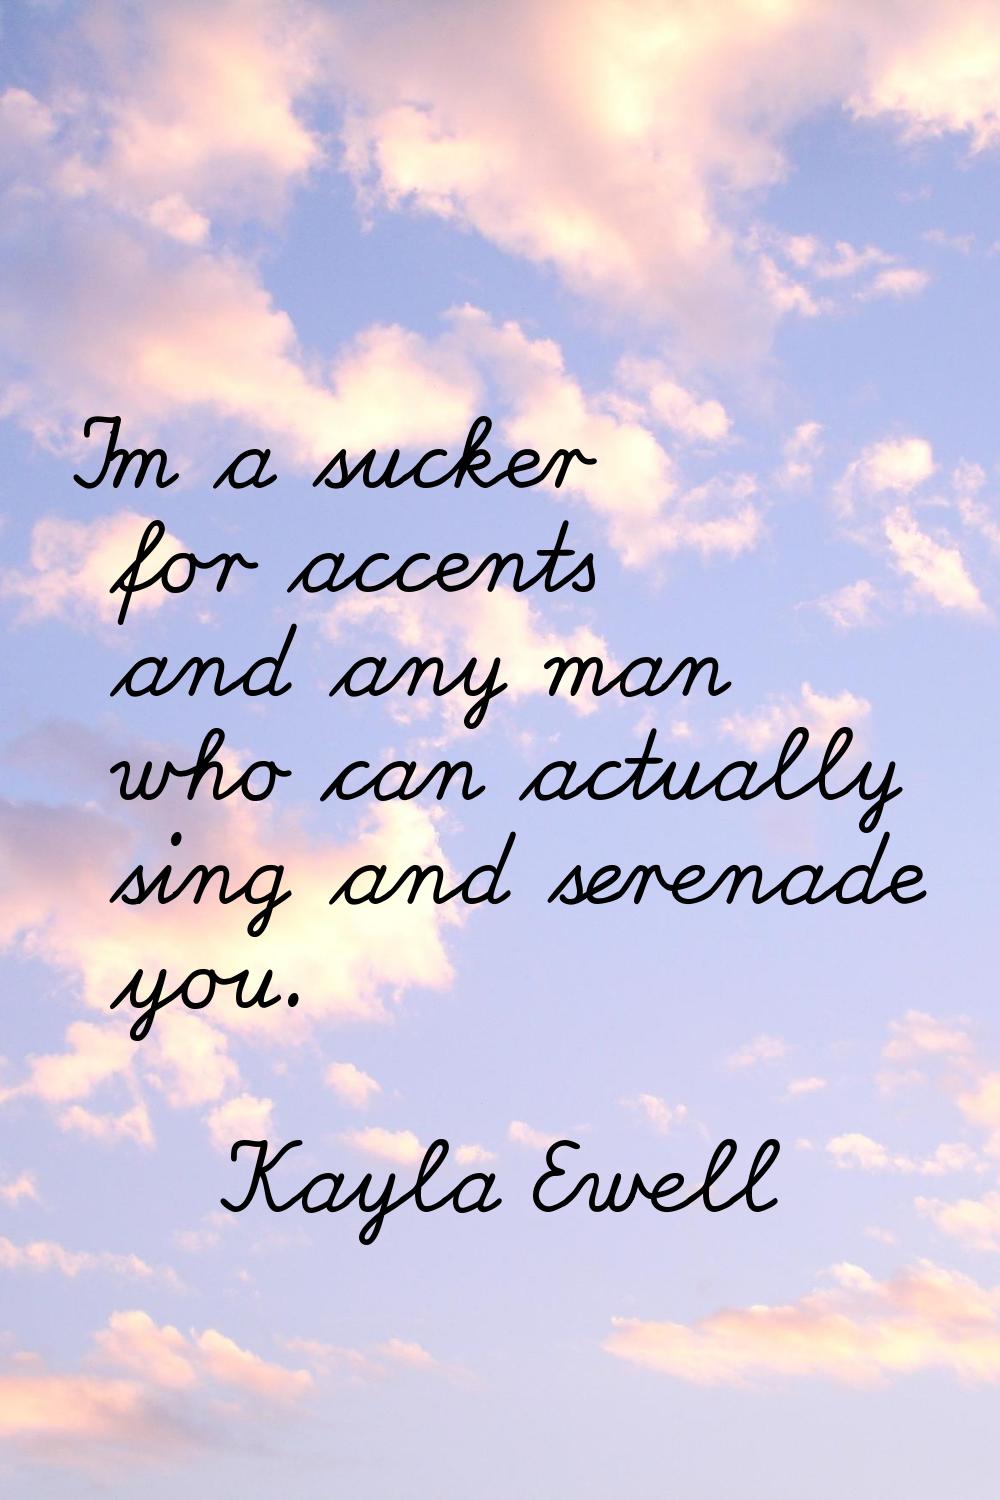 I'm a sucker for accents and any man who can actually sing and serenade you.